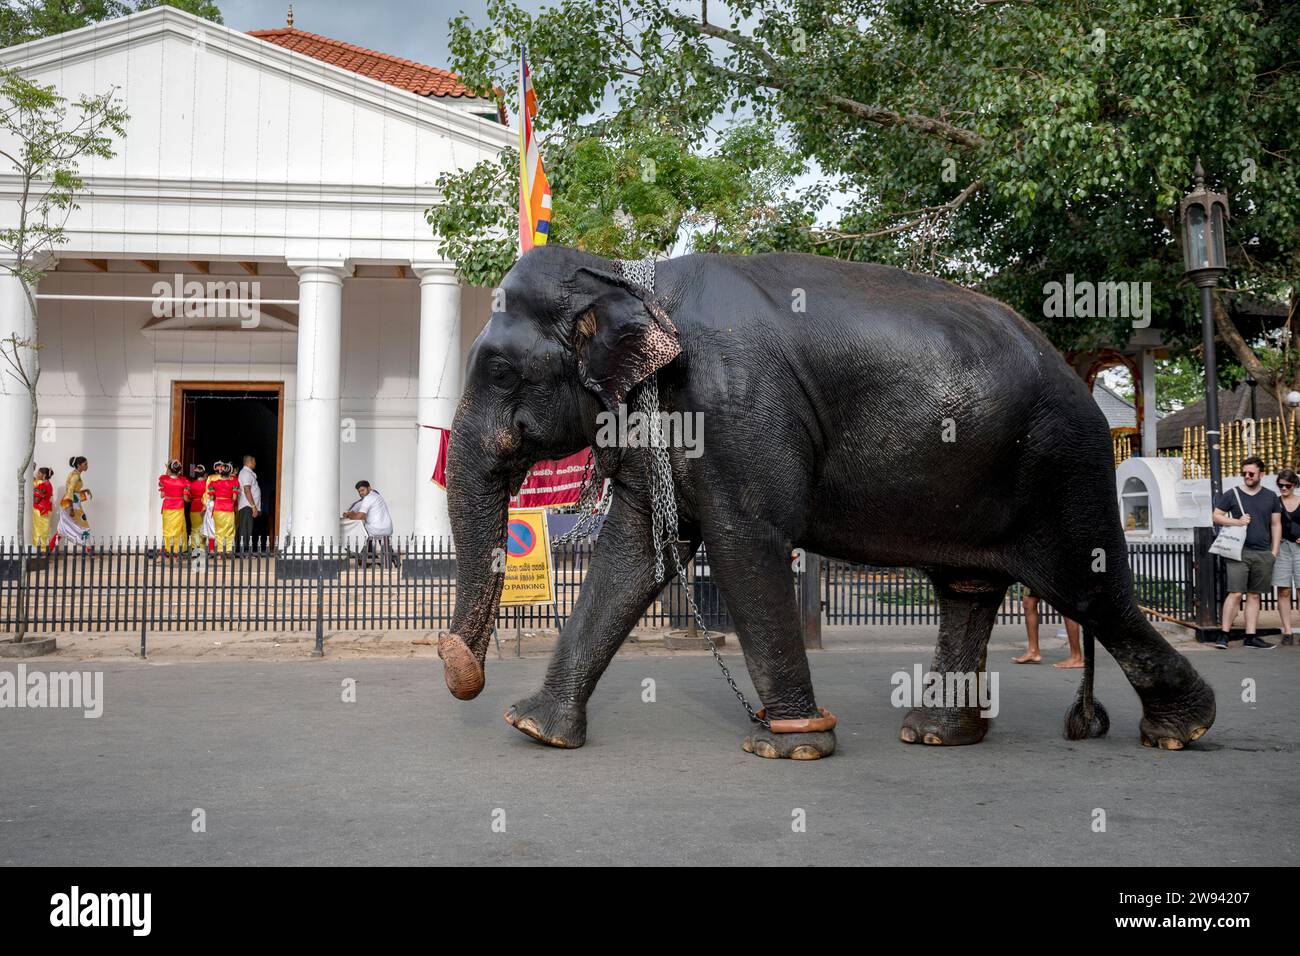 A ceremonial elephant  walks on a street at Kandy in Sri Lanka after being washed at a nearby fountain prior to the start of the Esala Perahera. Stock Photo